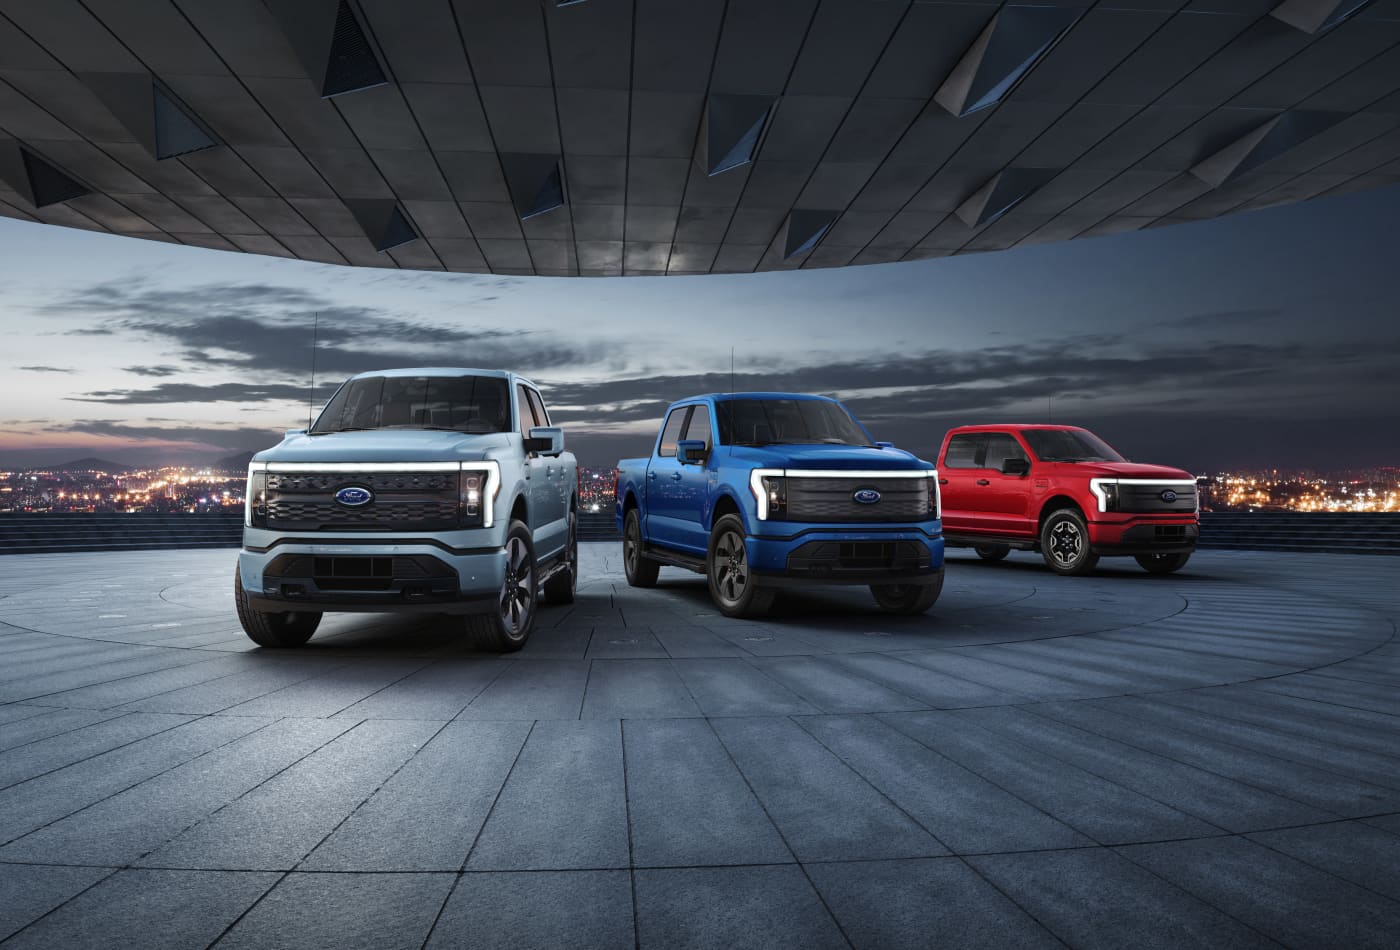 Ford reveals the new Electric F-150 Lightning Truck